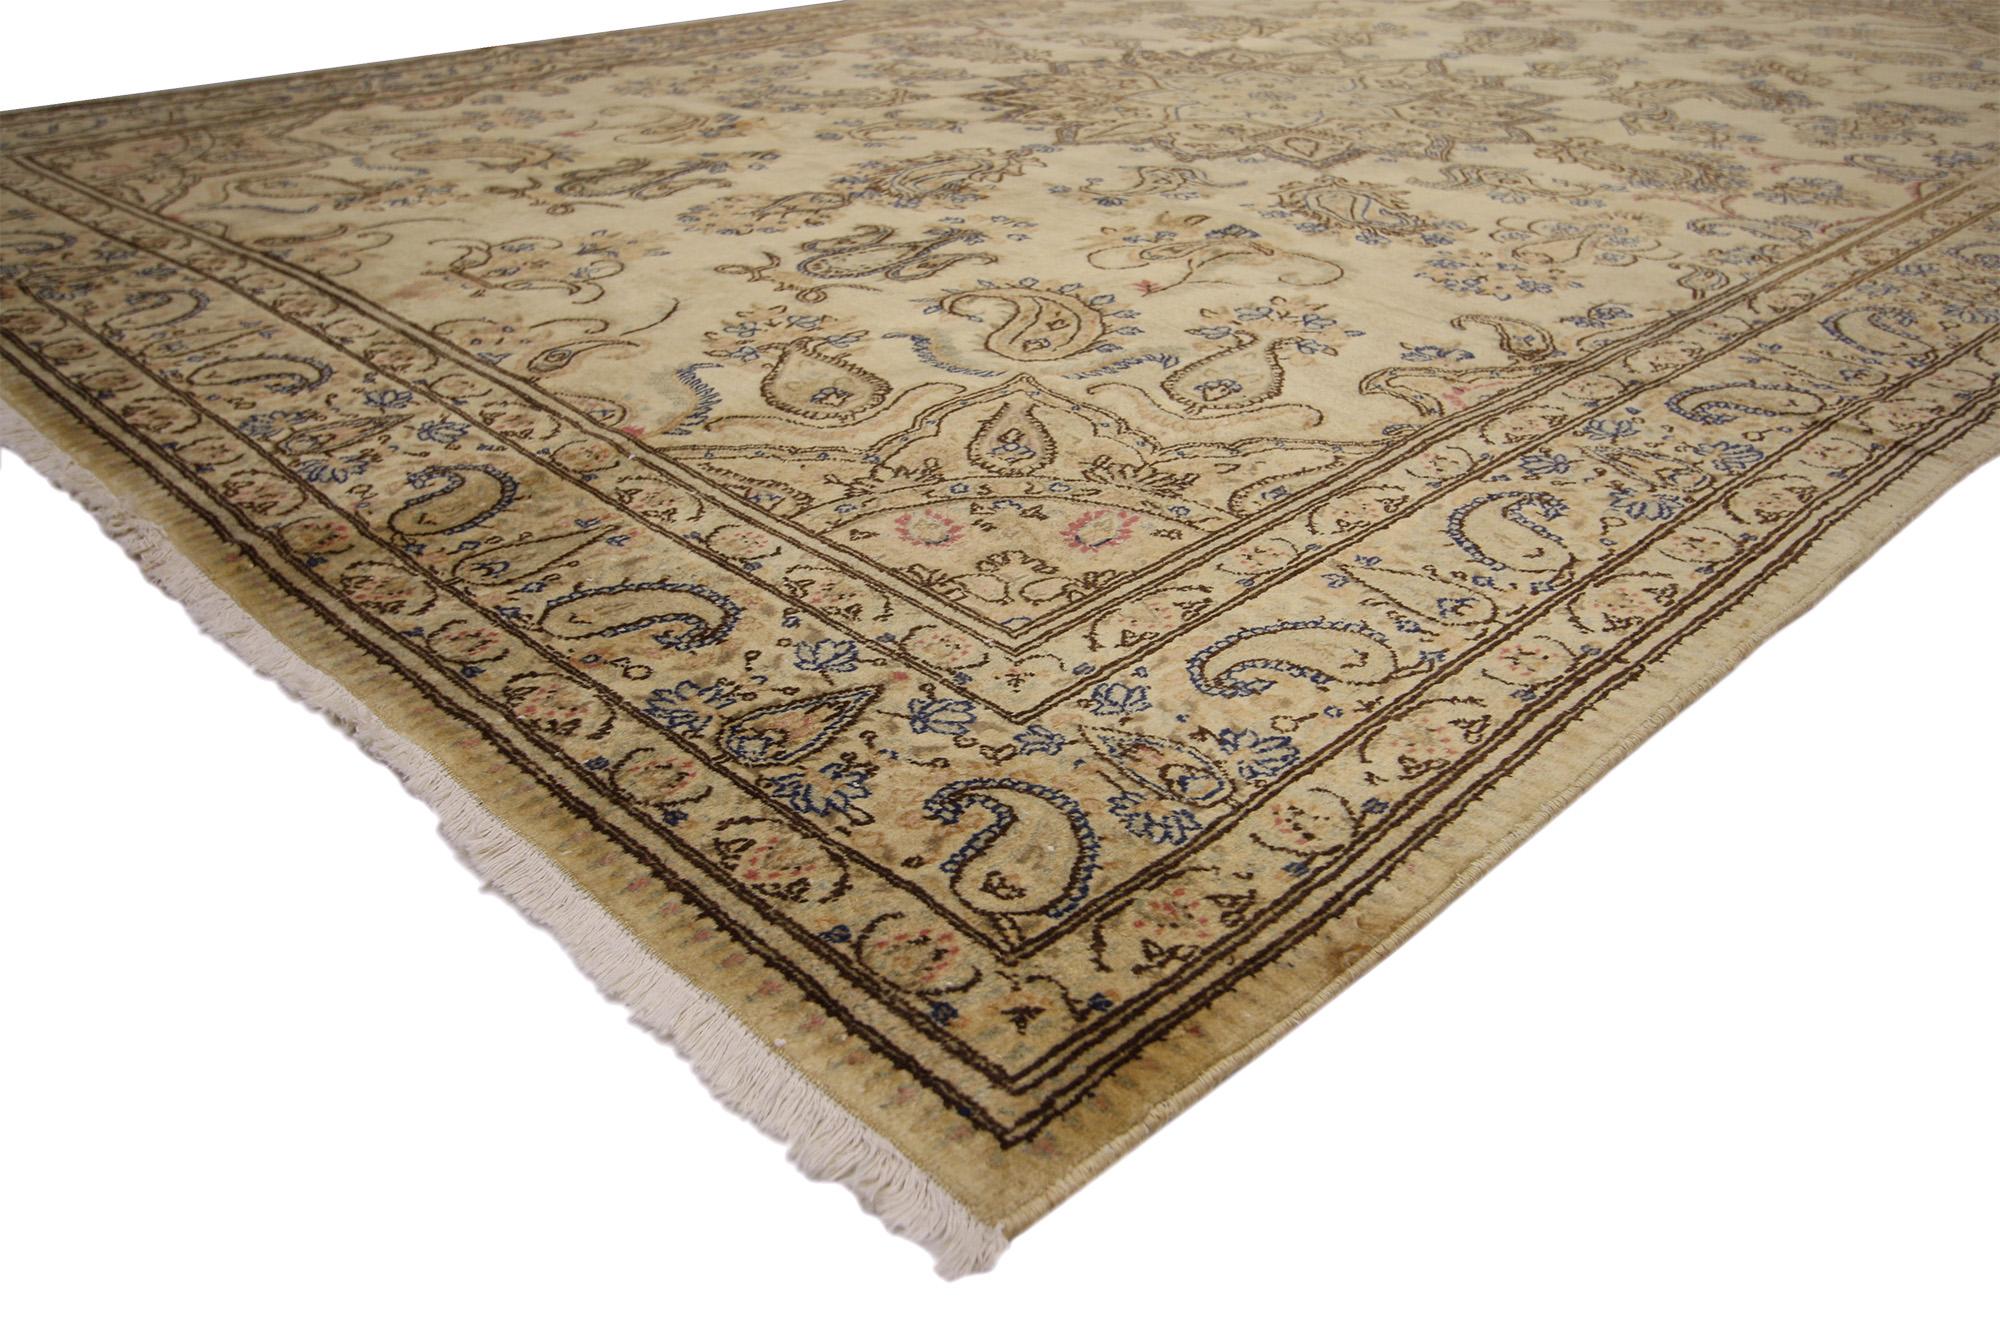 75293 Vintage Persian Kerman Rug, 08'00 X 11'09. Antique-washed Persian Kerman rugs are a type of Persian rug that has undergone a washing process to soften the colors and create a faded, antique look. The intention is to mimic the appearance of